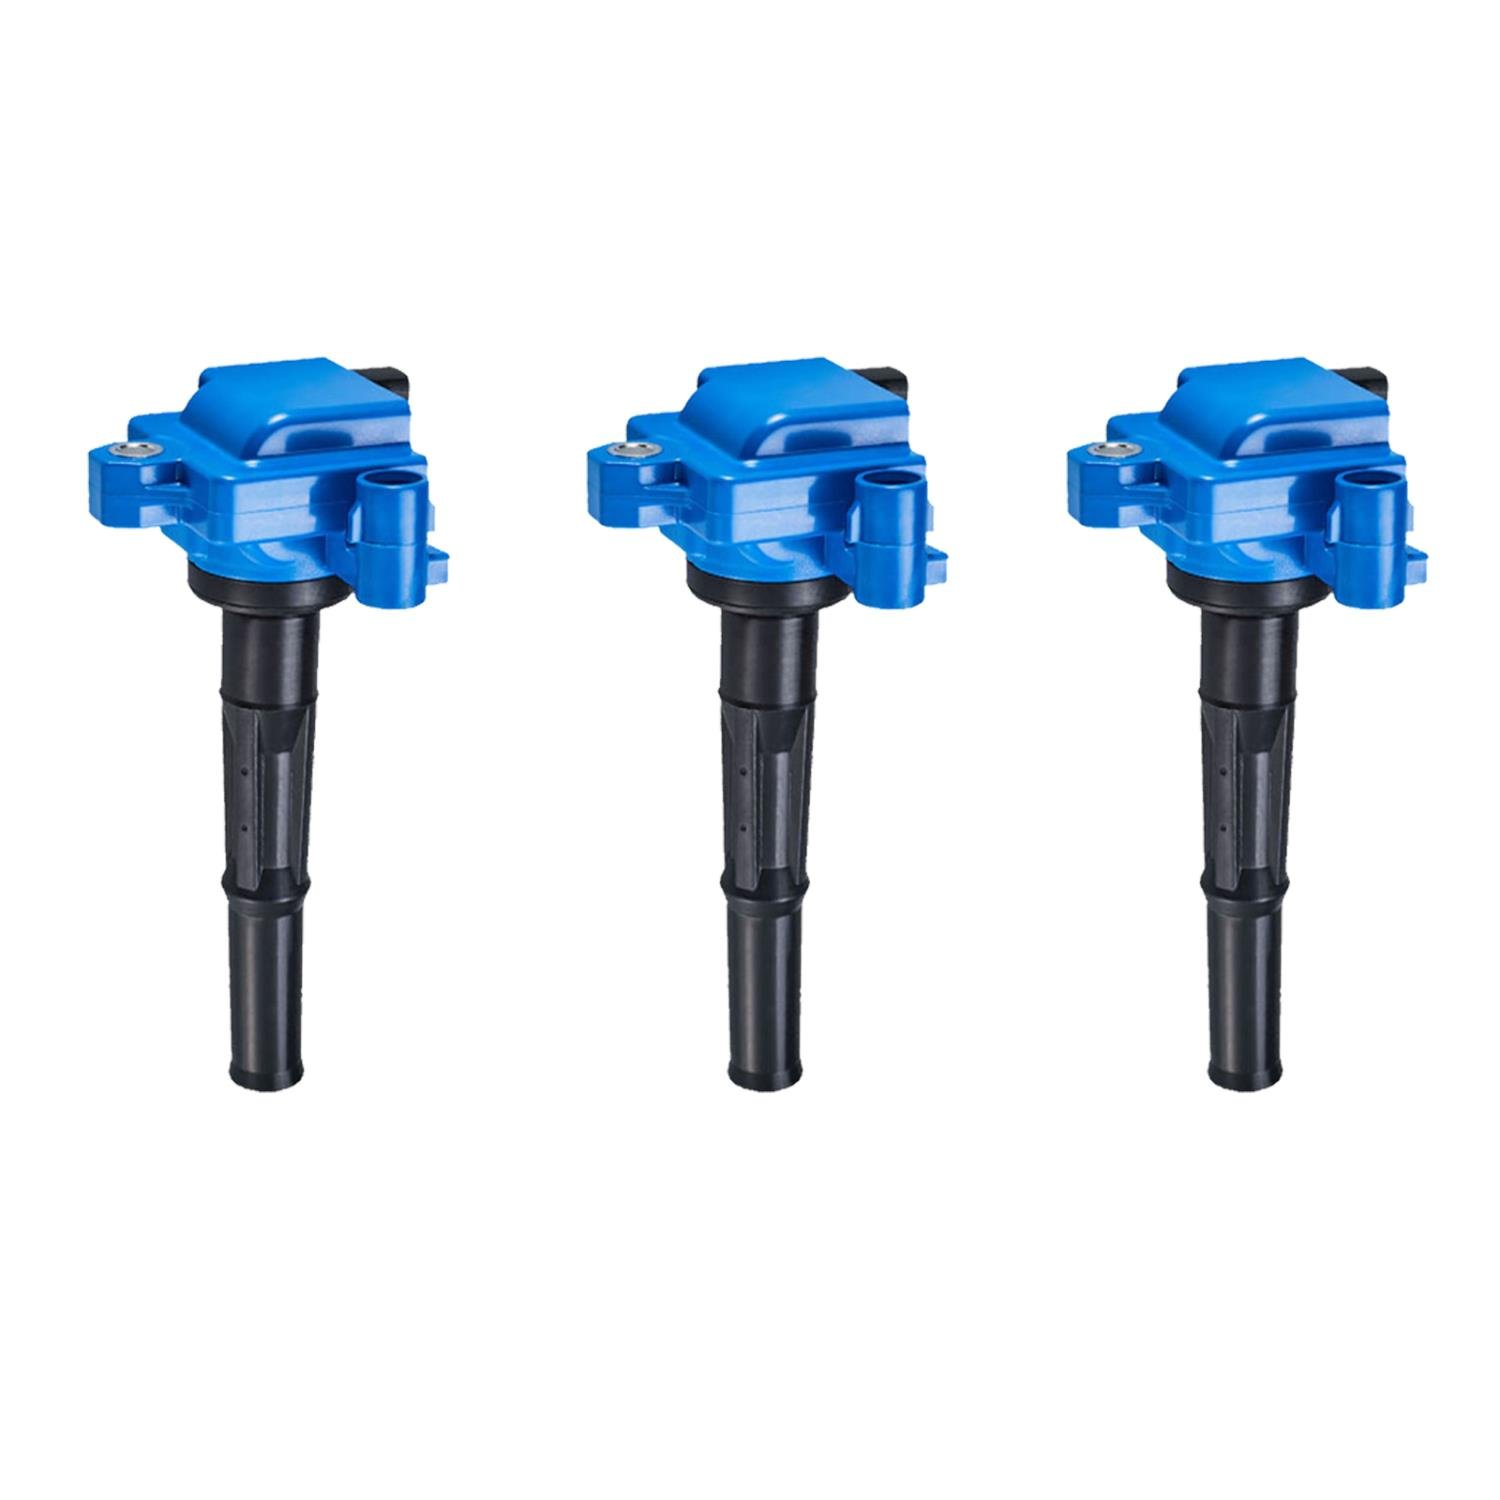 High-Performance Ignition Coils for Toyota Tacoma 3.4L [Blue]